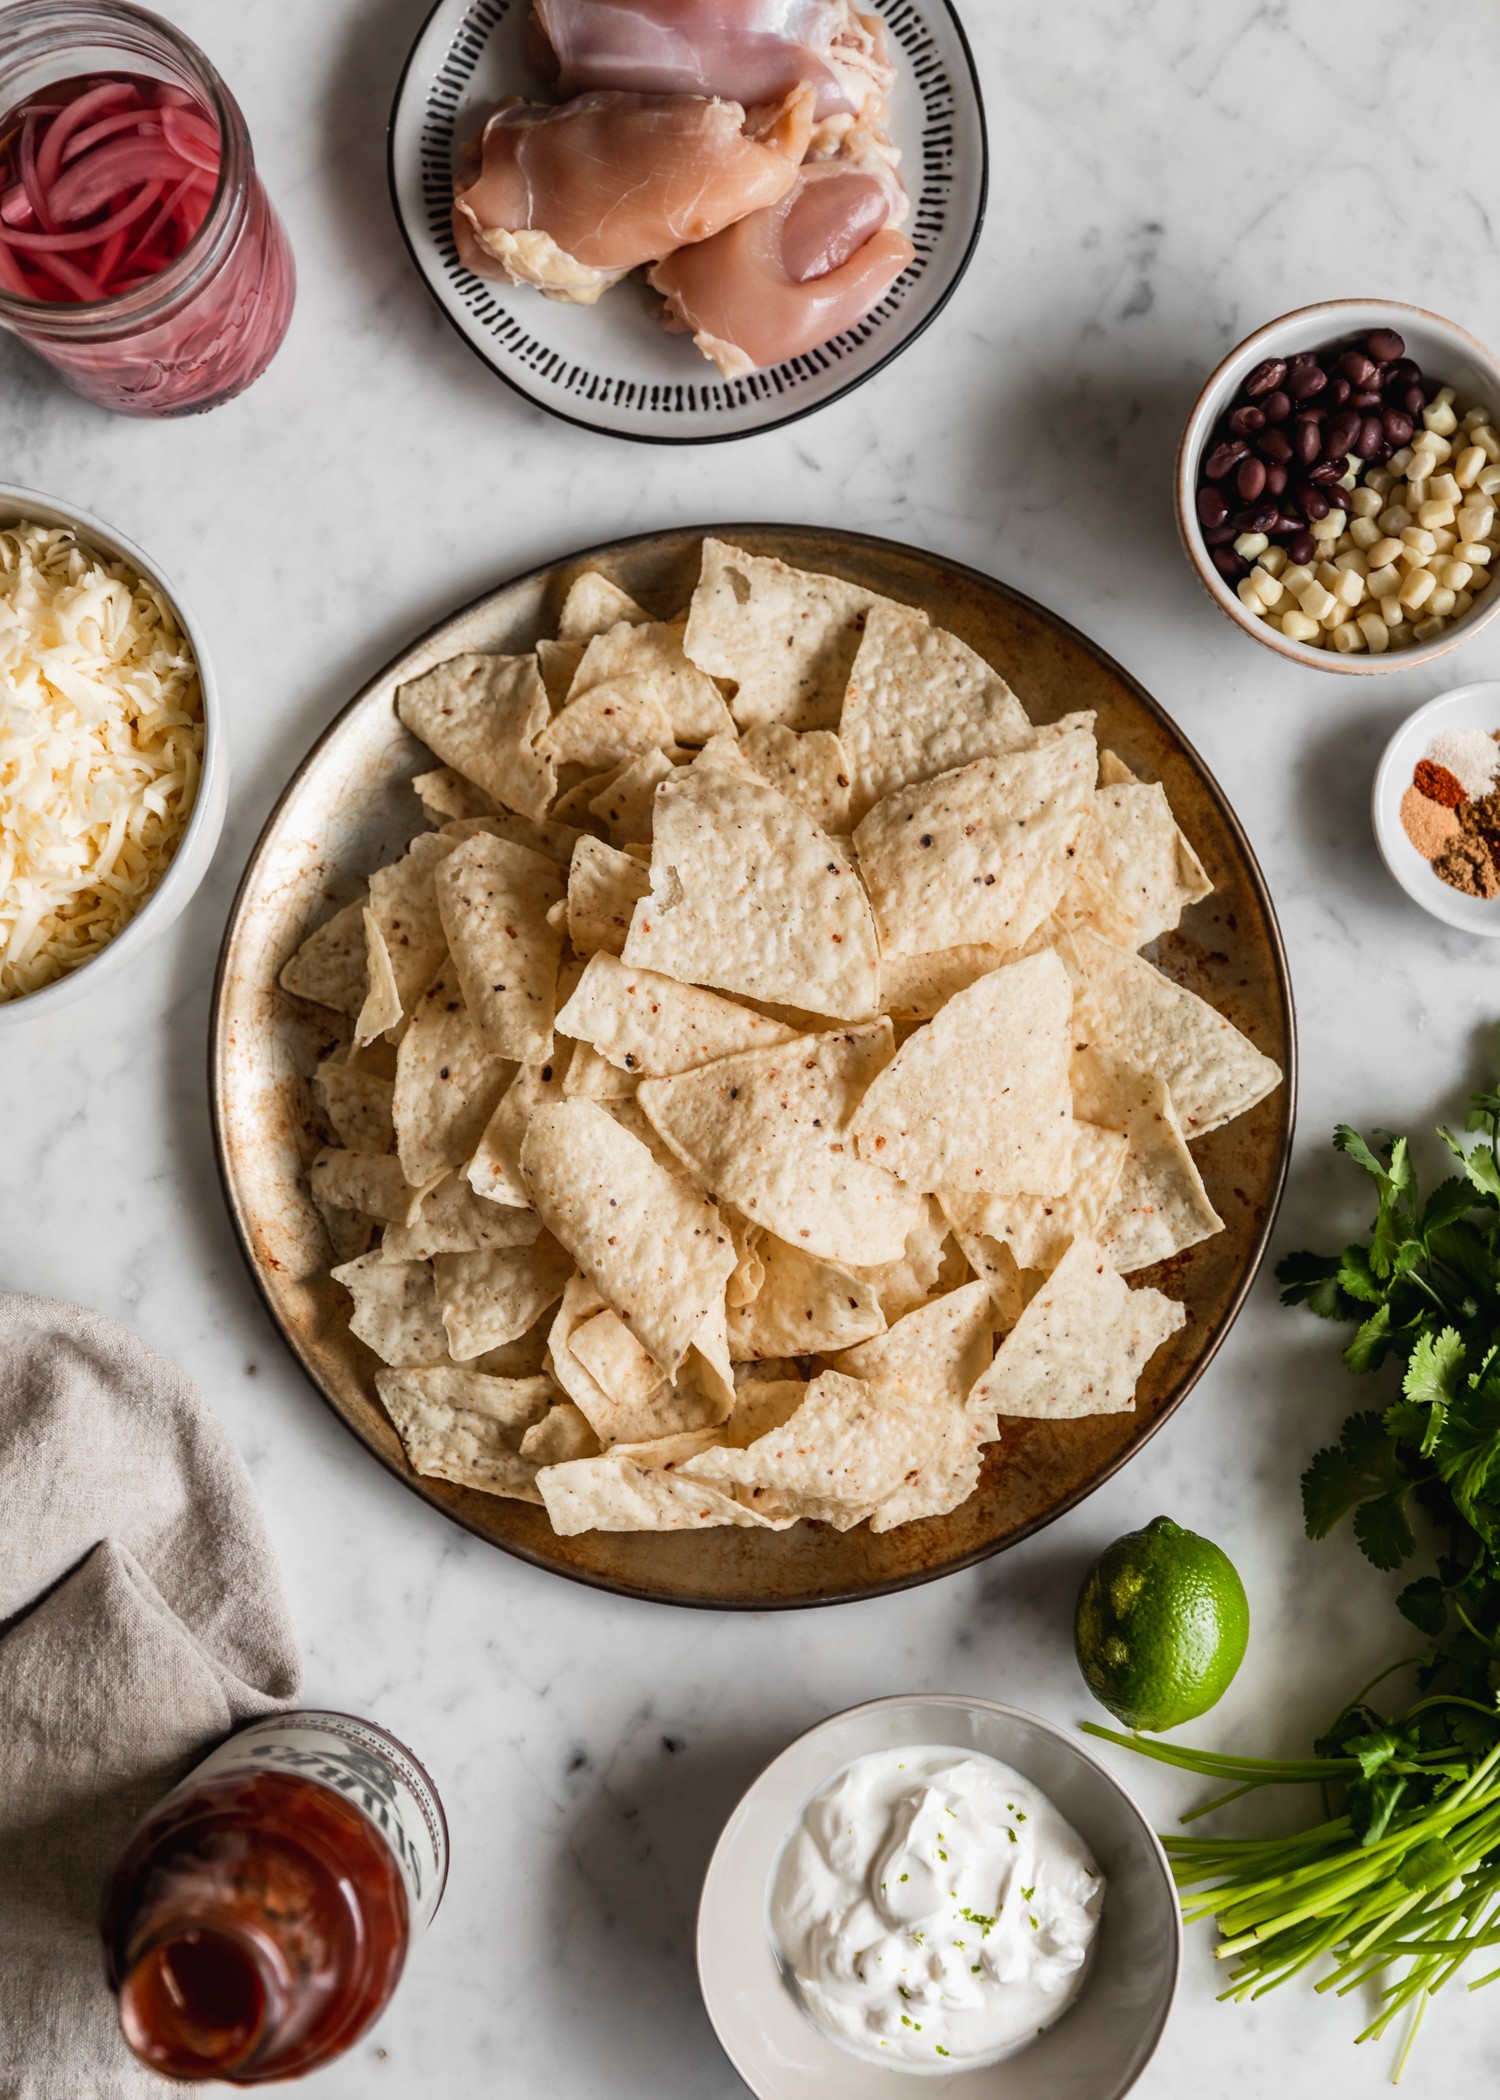 An overhead picture of a plate of tortilla chips surrounded by meat, veggies, cheese, sour cream, and spices on a marble counter.